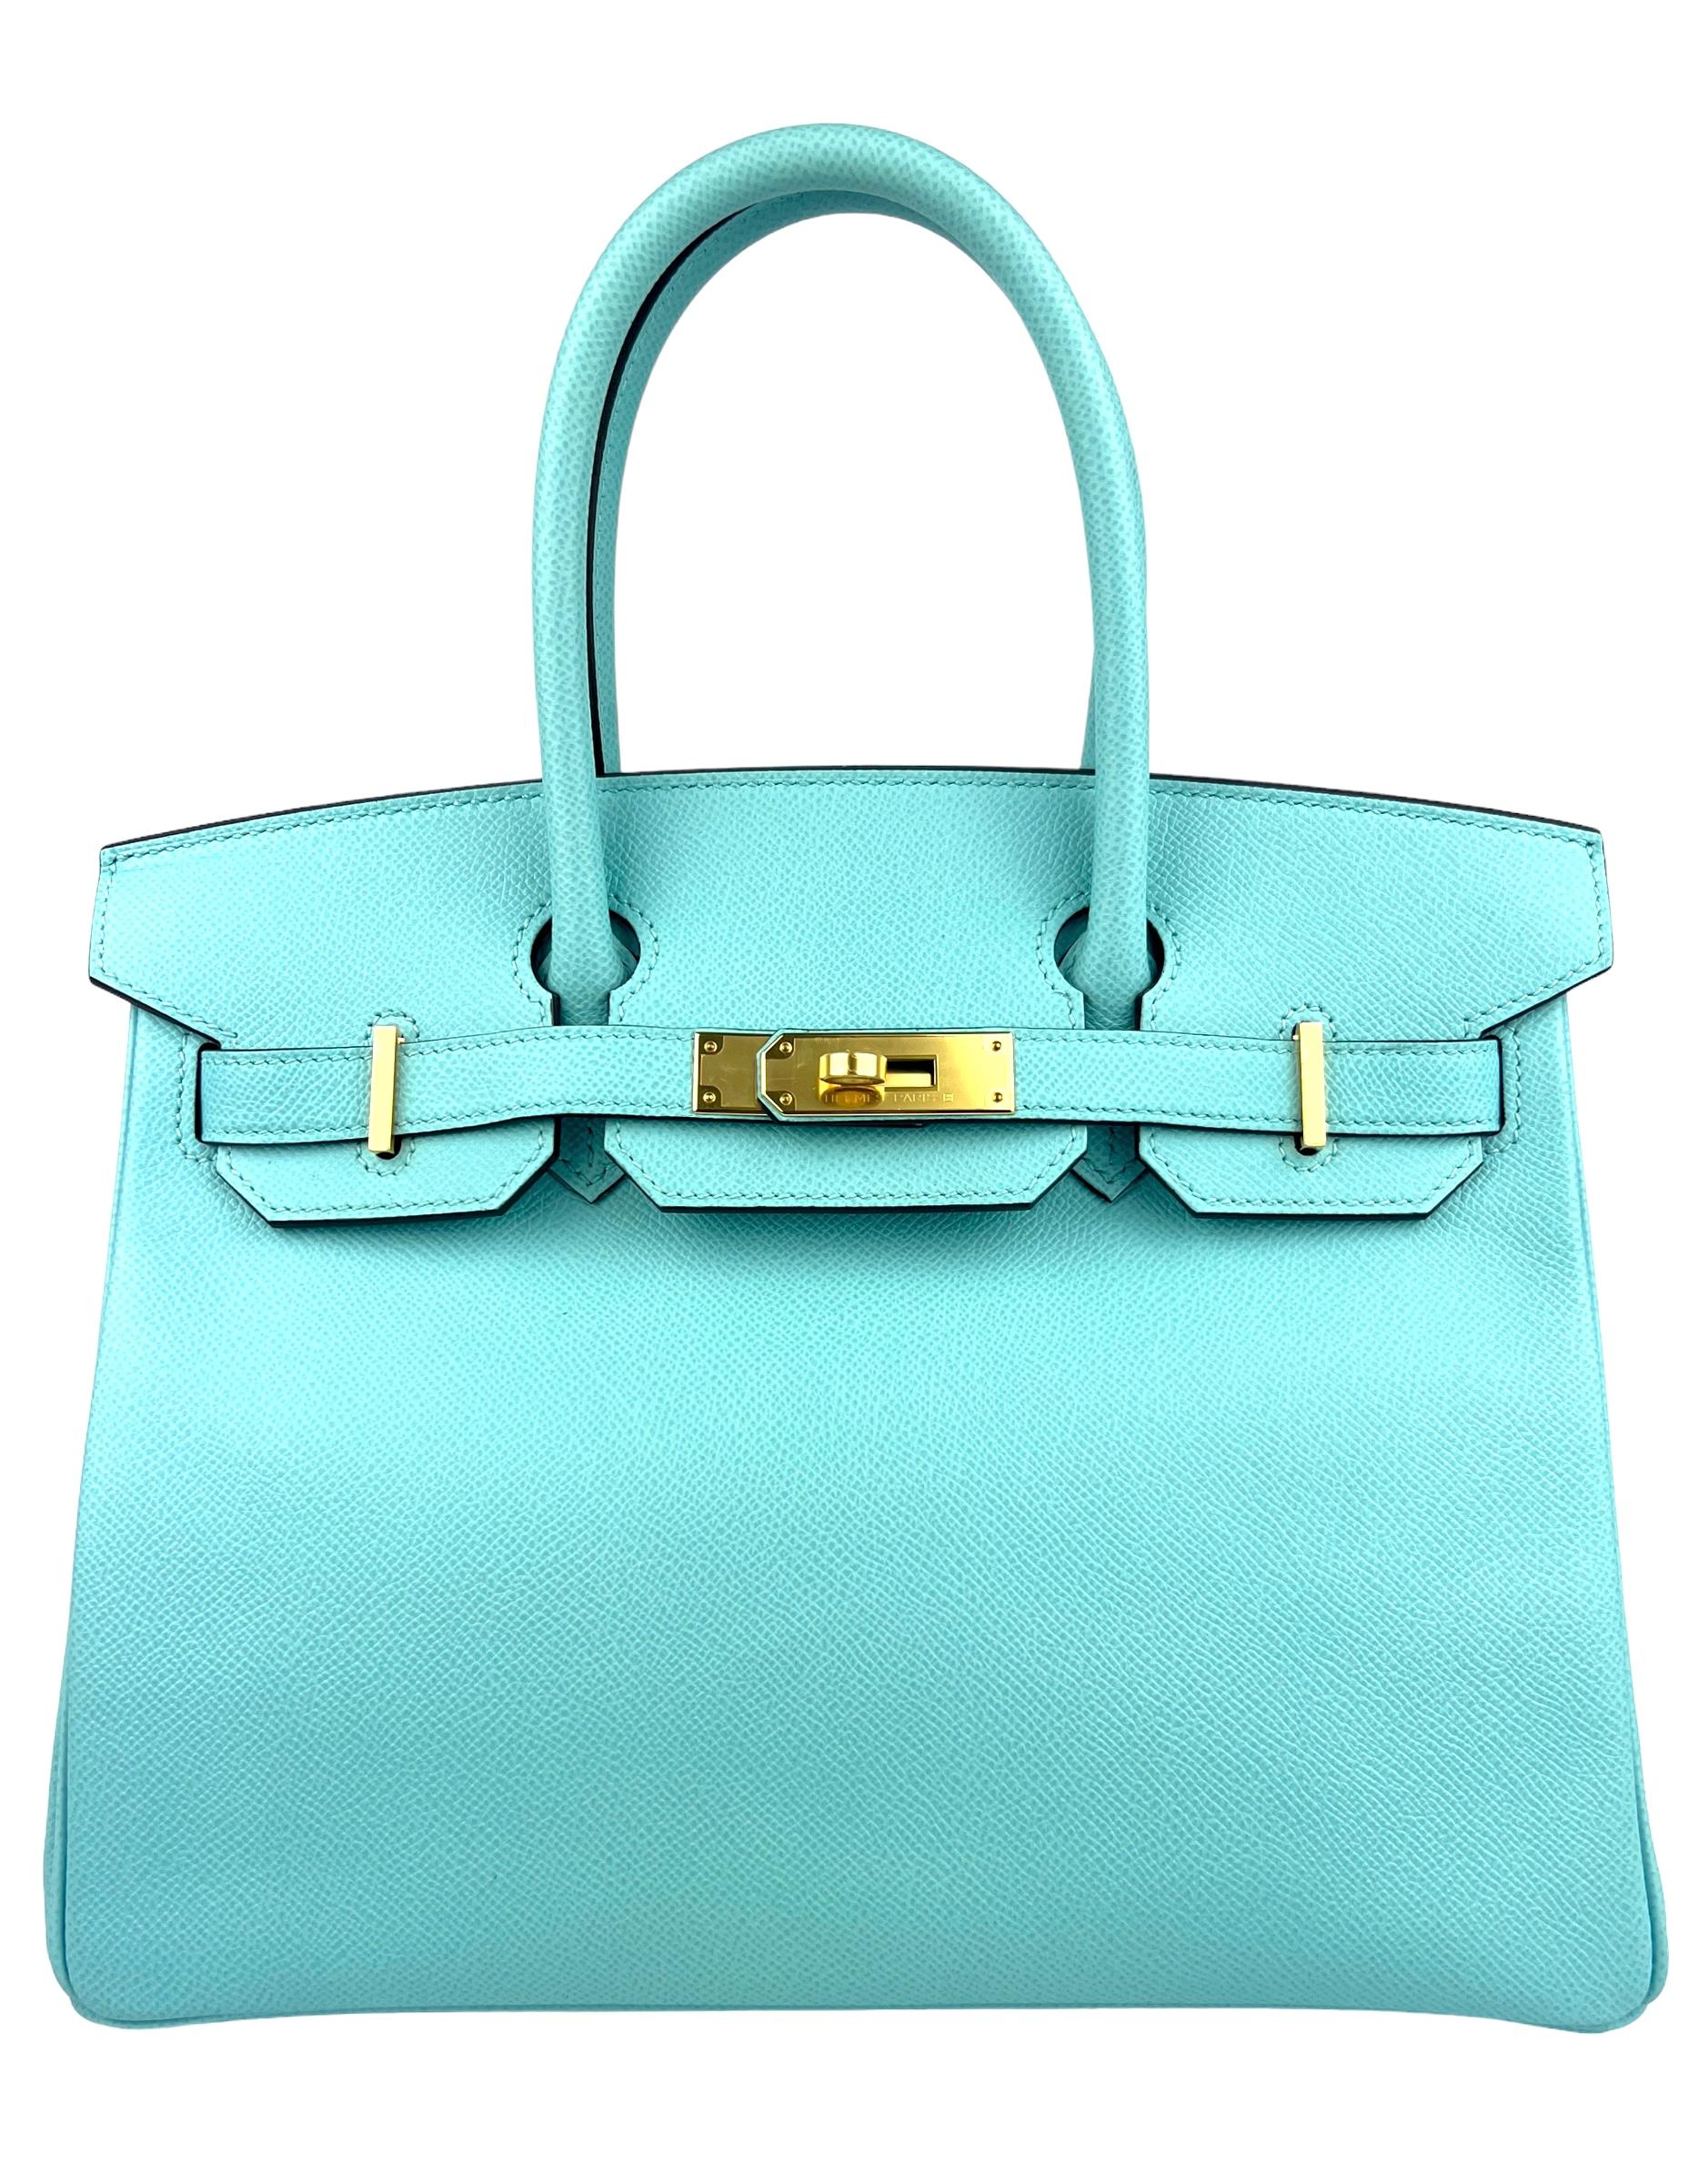 One of the most coveted colors. Stunning Hermes Birkin 30 Blue Atoll Epsom Gold Hardware. T Stamp 2015. Excellent Pristine Condition, Plastic on hardware, perfect corners and structure.

Shop with Confidence from Lux Addicts. Authenticity